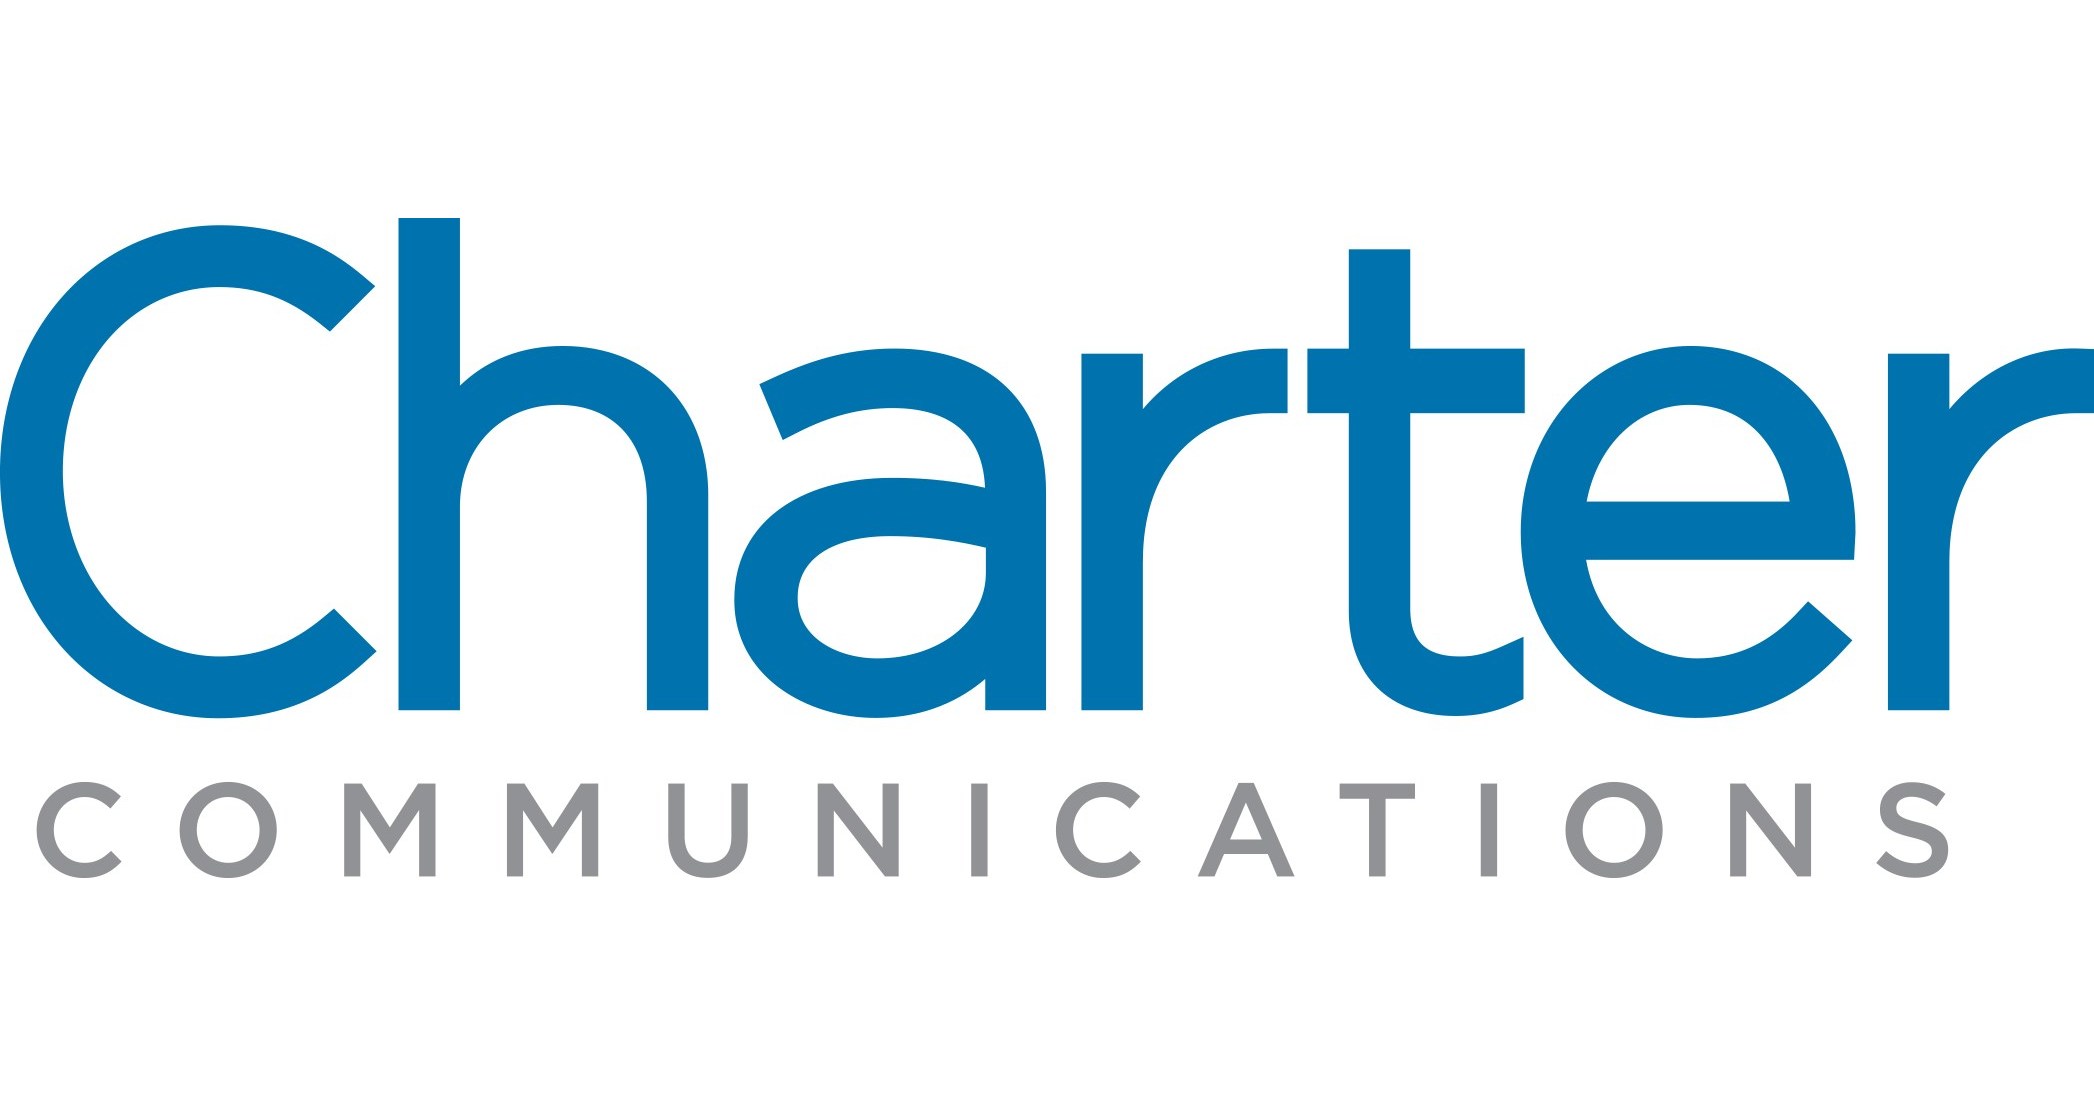 CHARTER PROMOTES PAUL WOELK TO SENIOR VICE PRESIDENT, CABLE OPERATIONS BUSINESS PLANNING